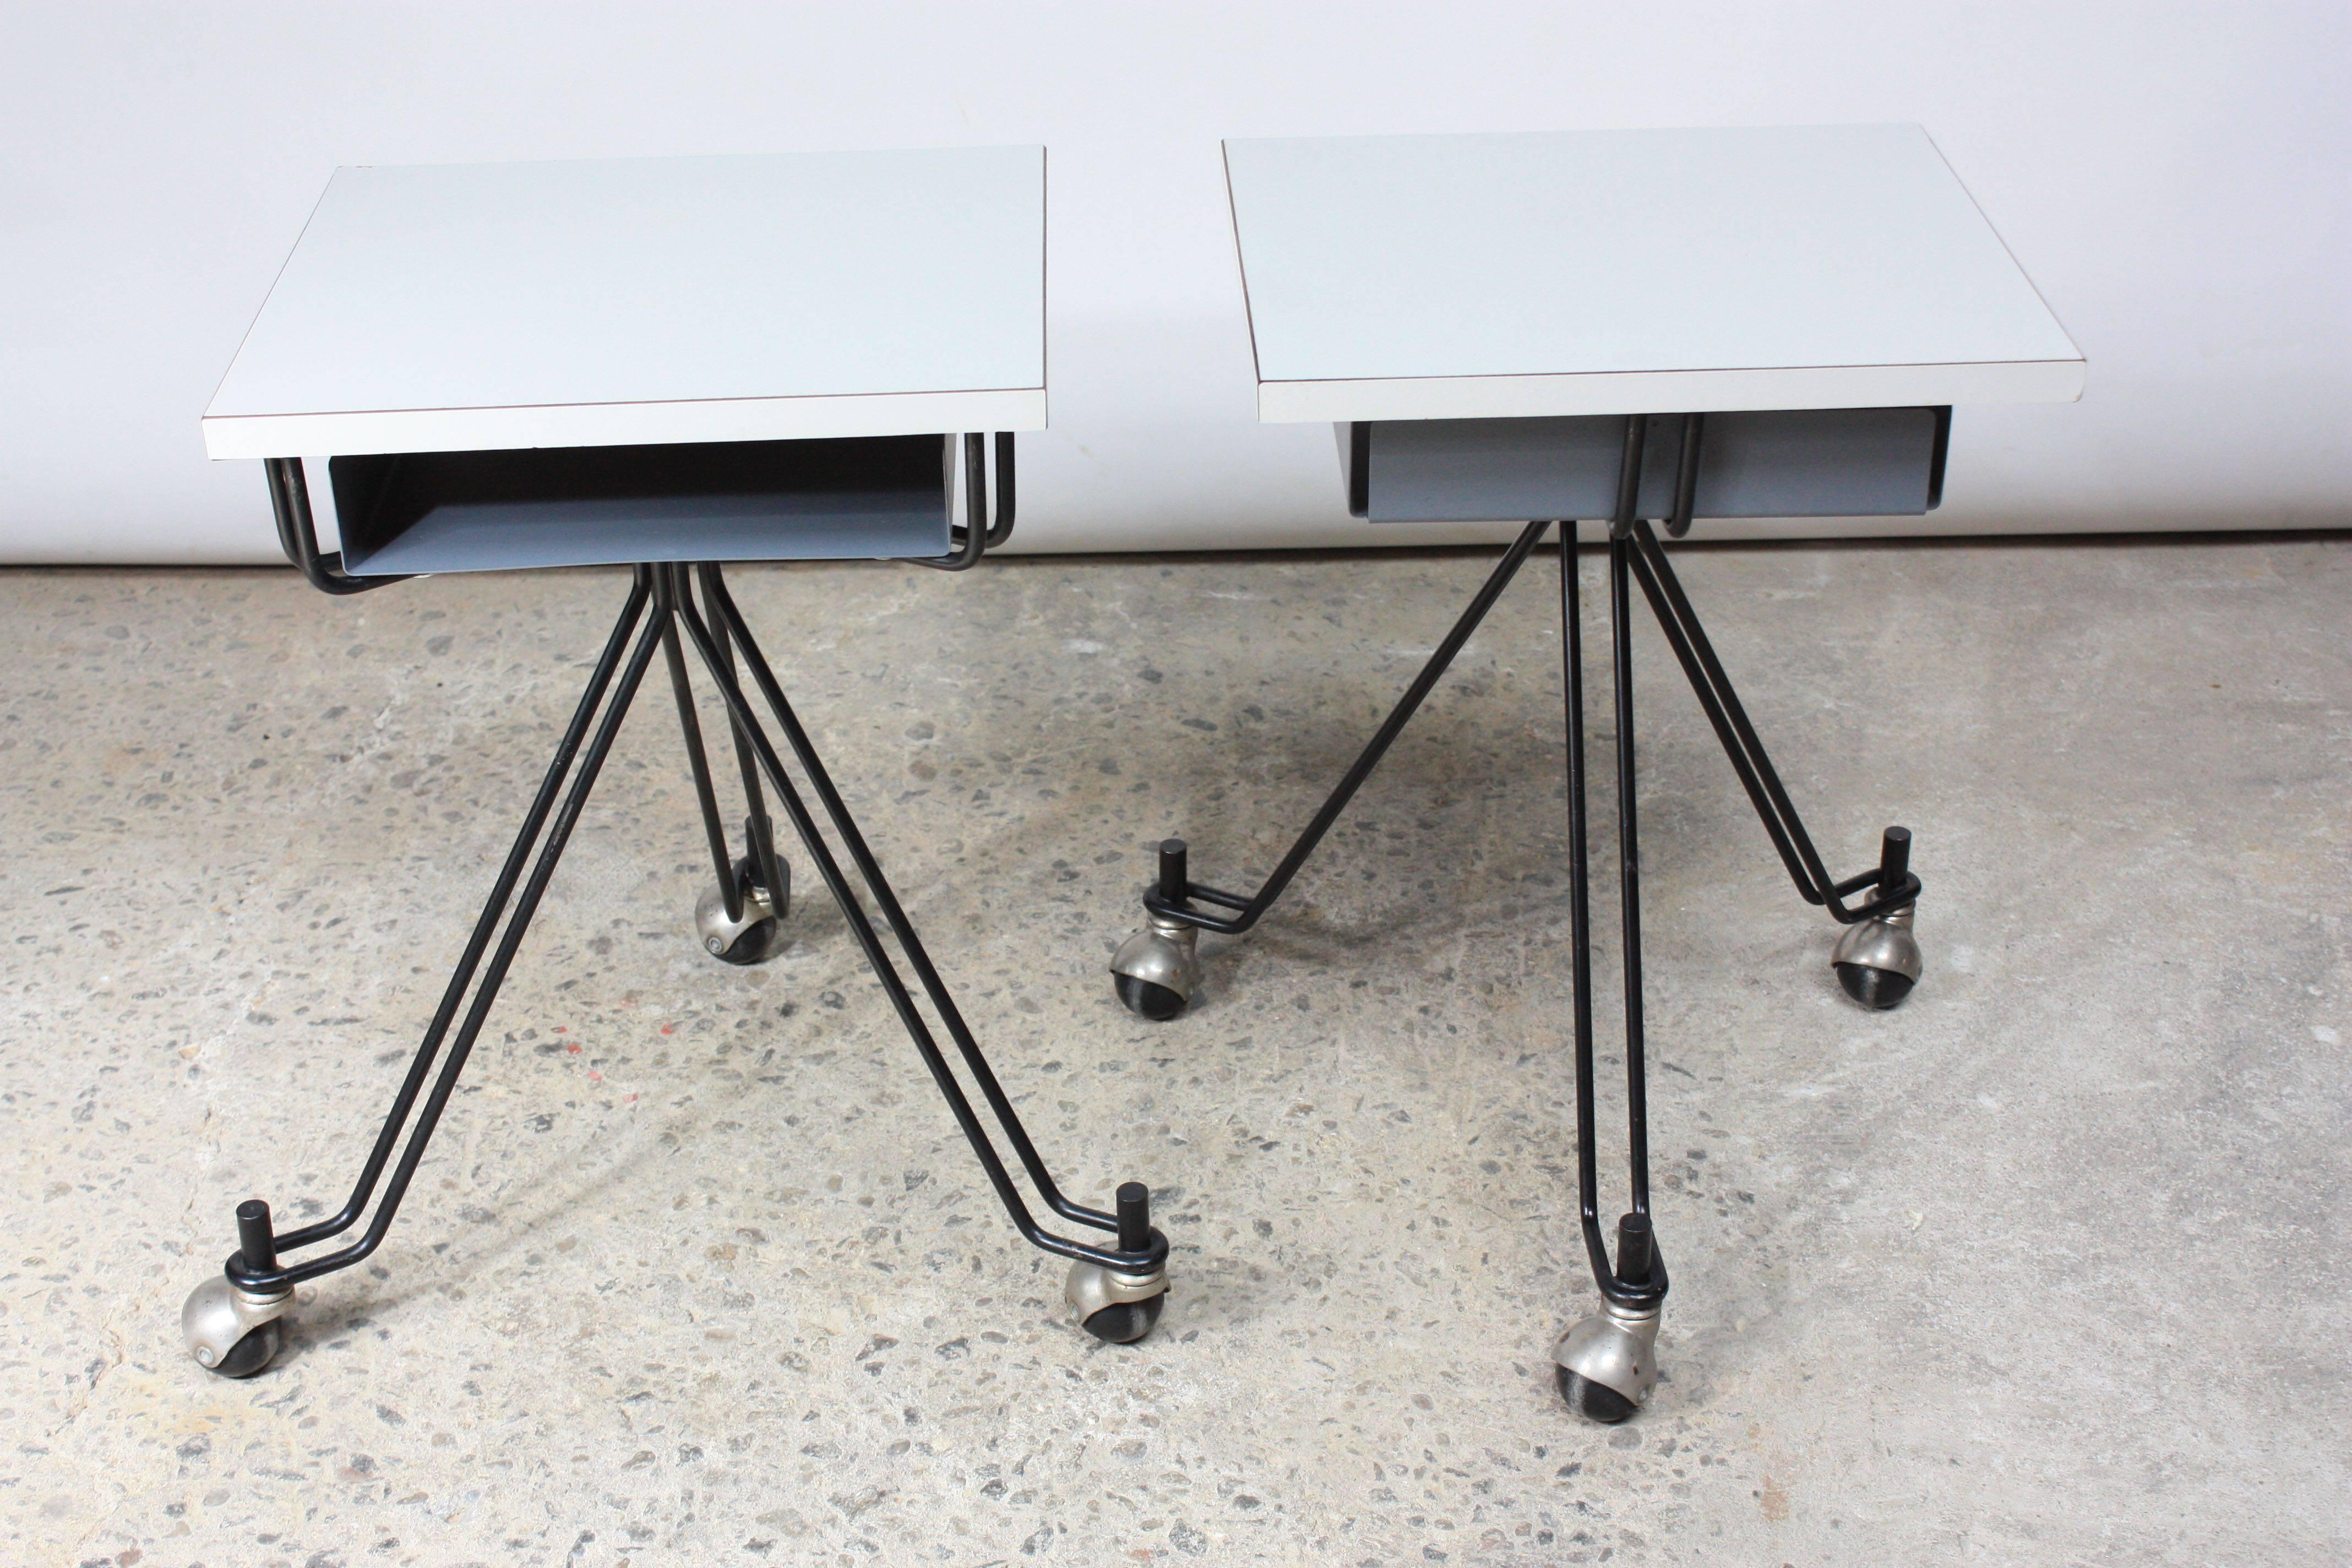 These tables were designed in 1955 by Eliot Noyes for IBM and feature white laminate tops and enameled steel/iron frames. The frames are supported by caster wheels, which allow for easy mobility. 
There is minor loss to the laminate and minimal